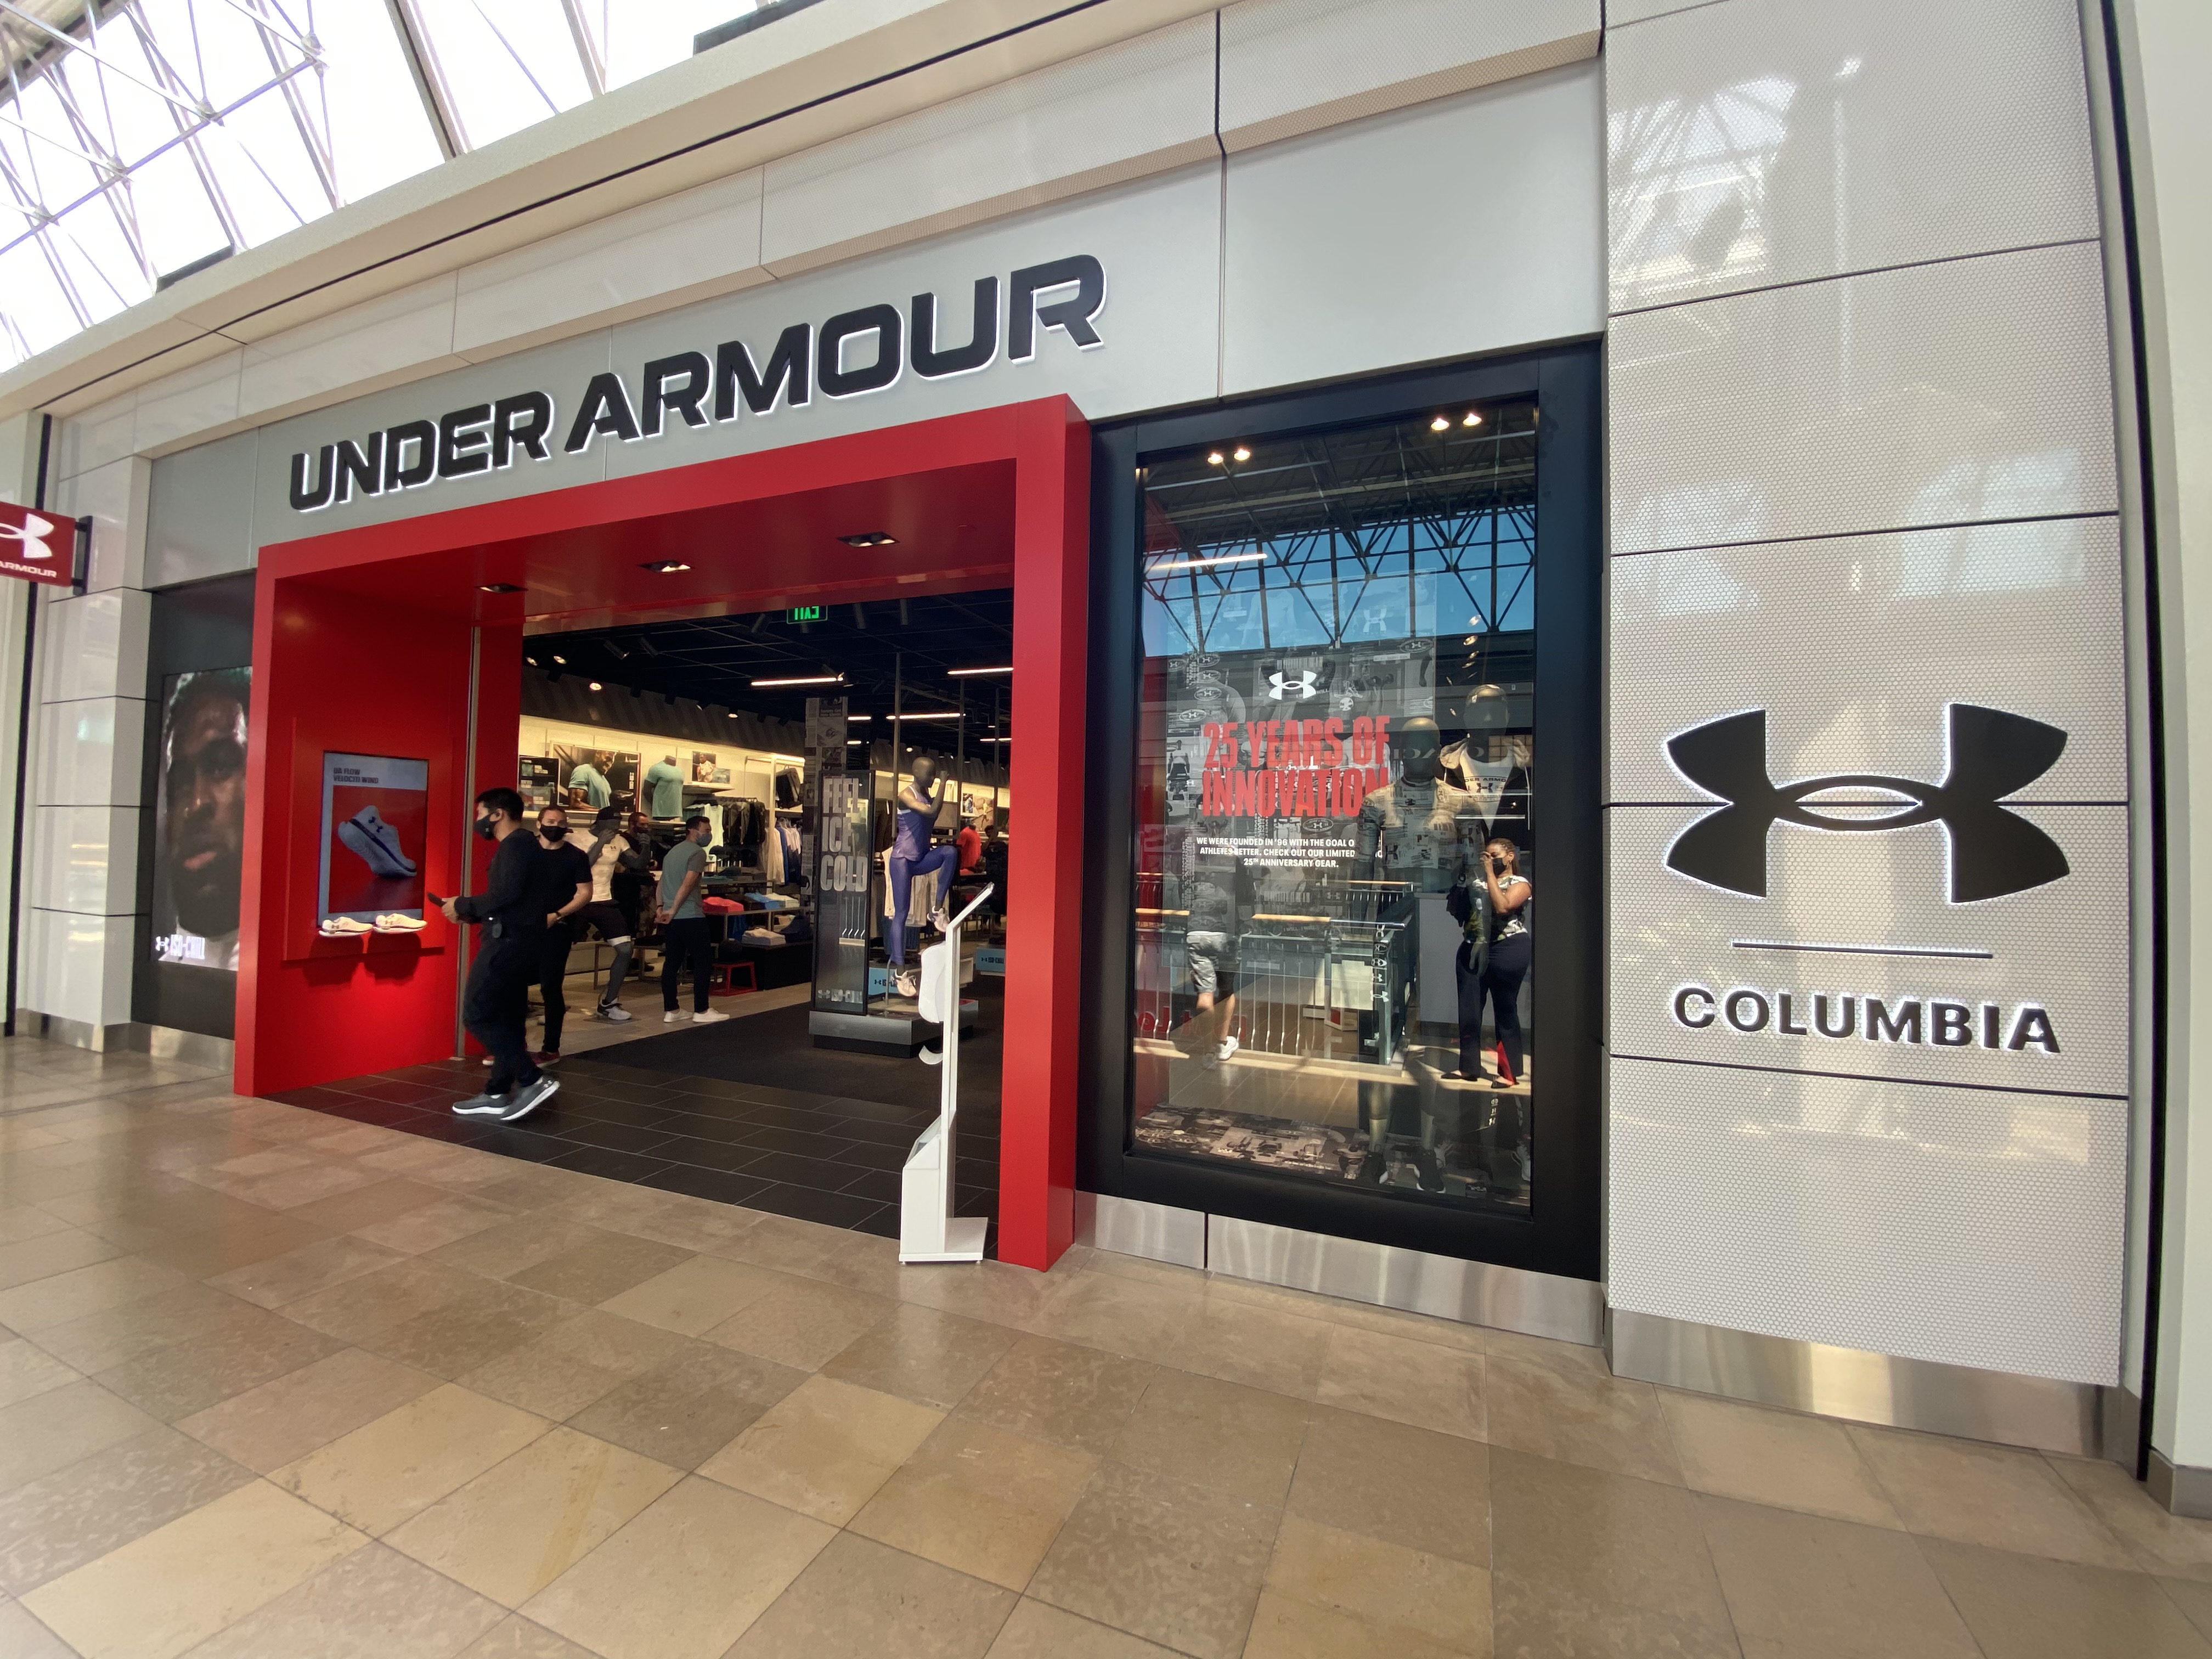 Under Armour - Columbia Brand House | Columbia, 21044